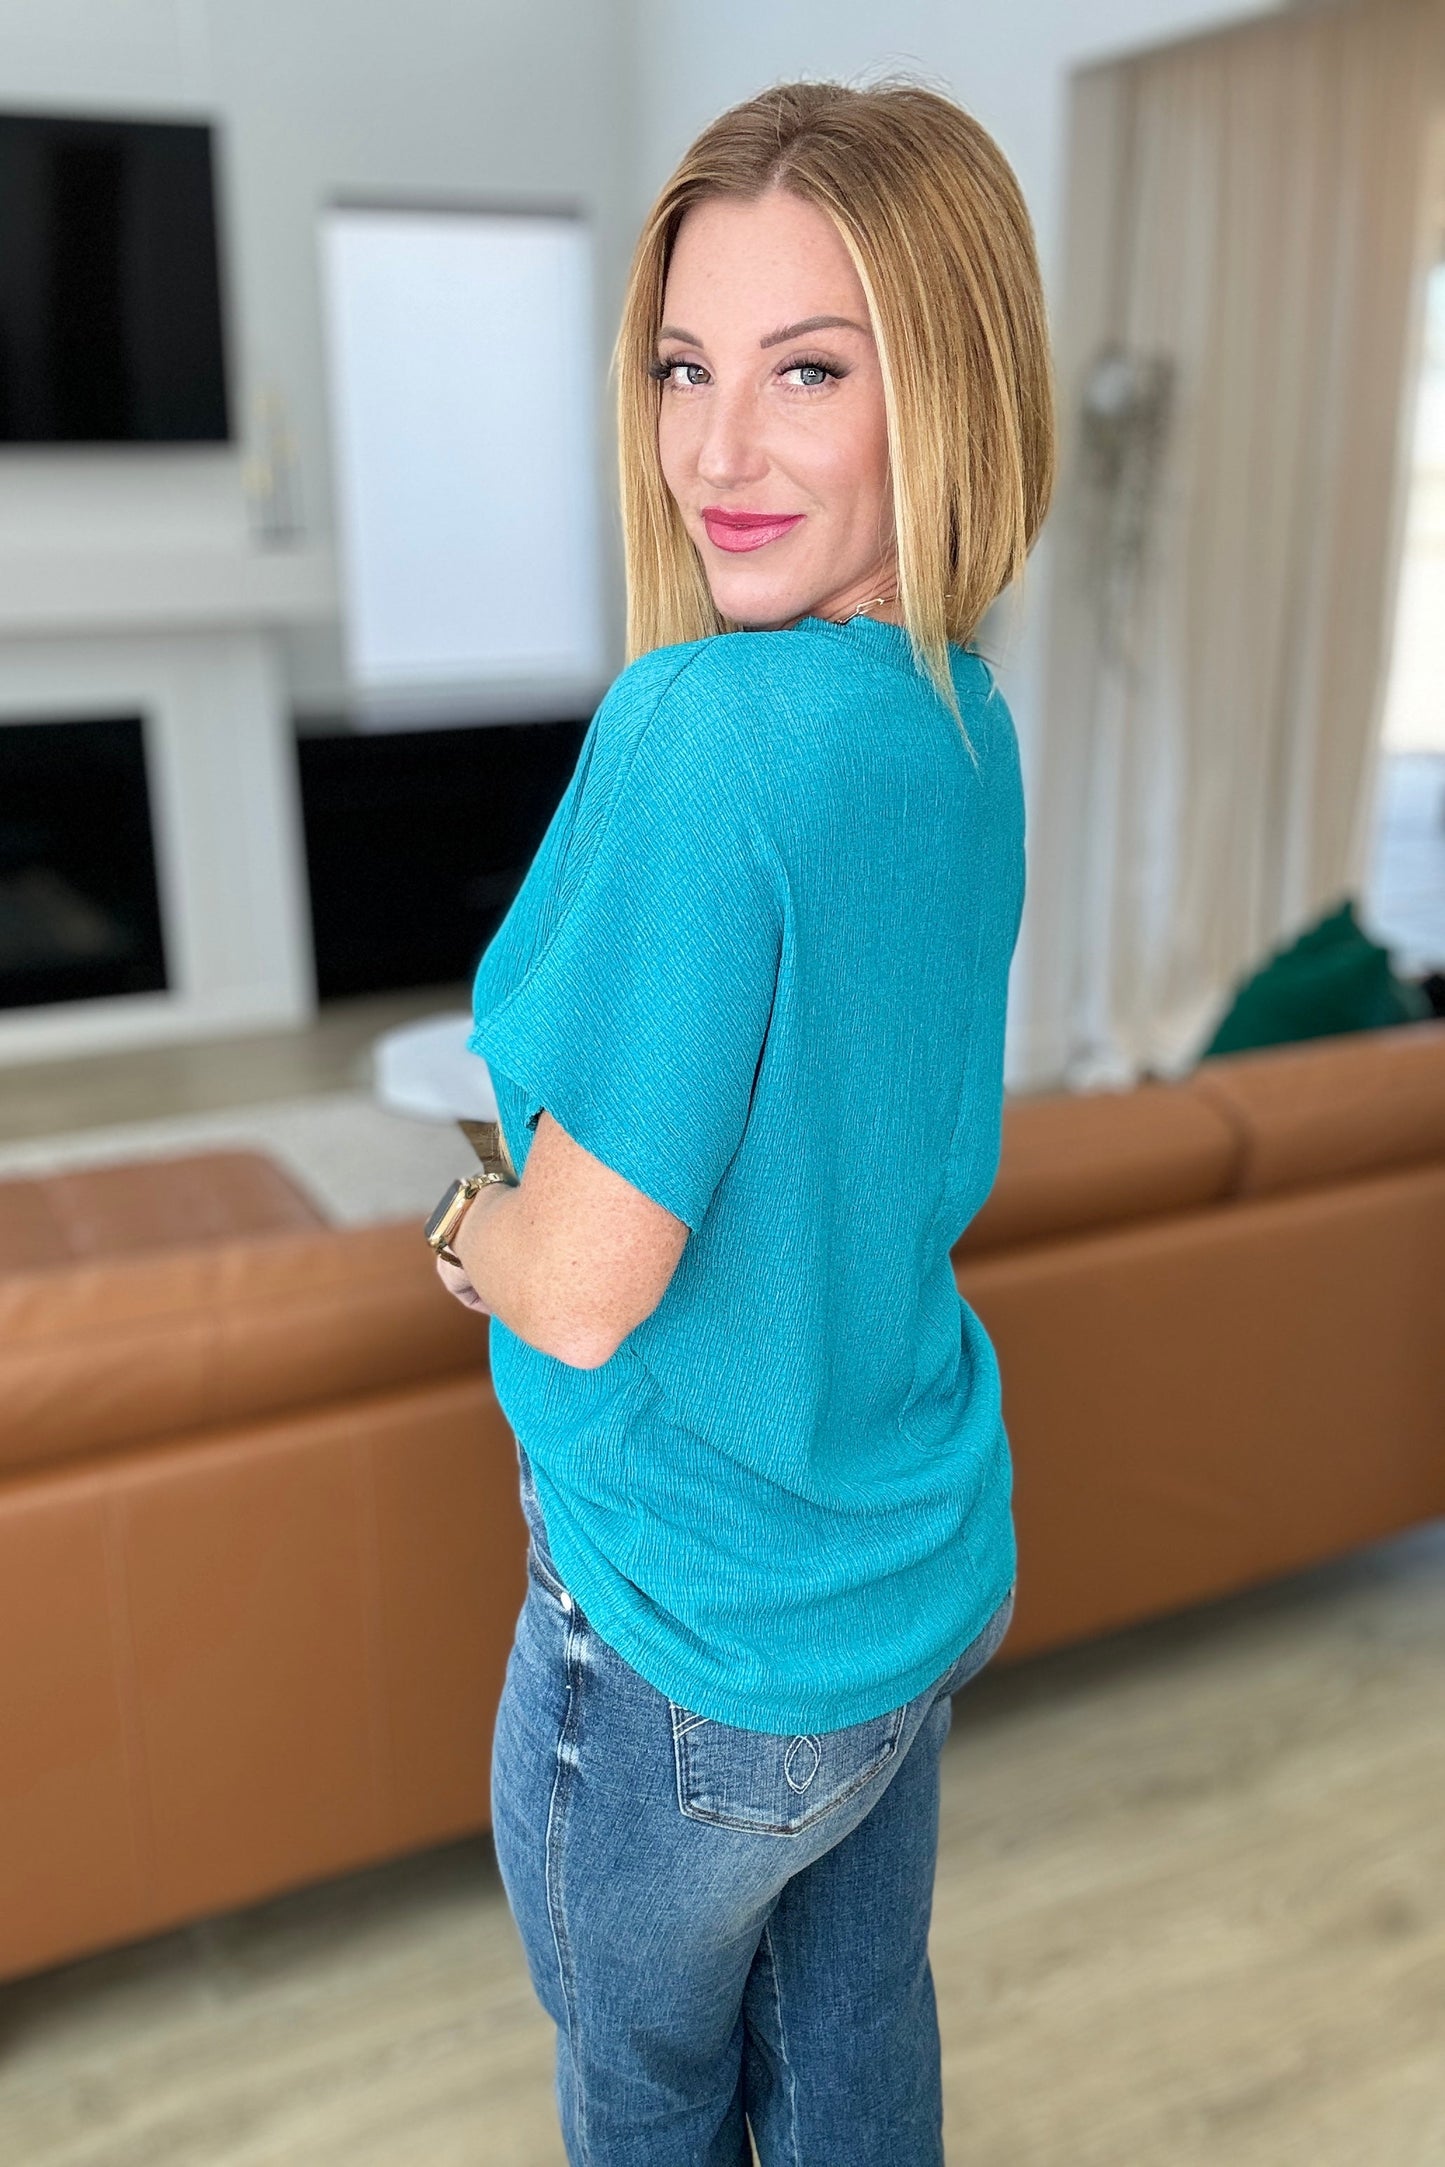 Trial and Error Textured V-Neck Blouse in Teal - FamFancy Boutique